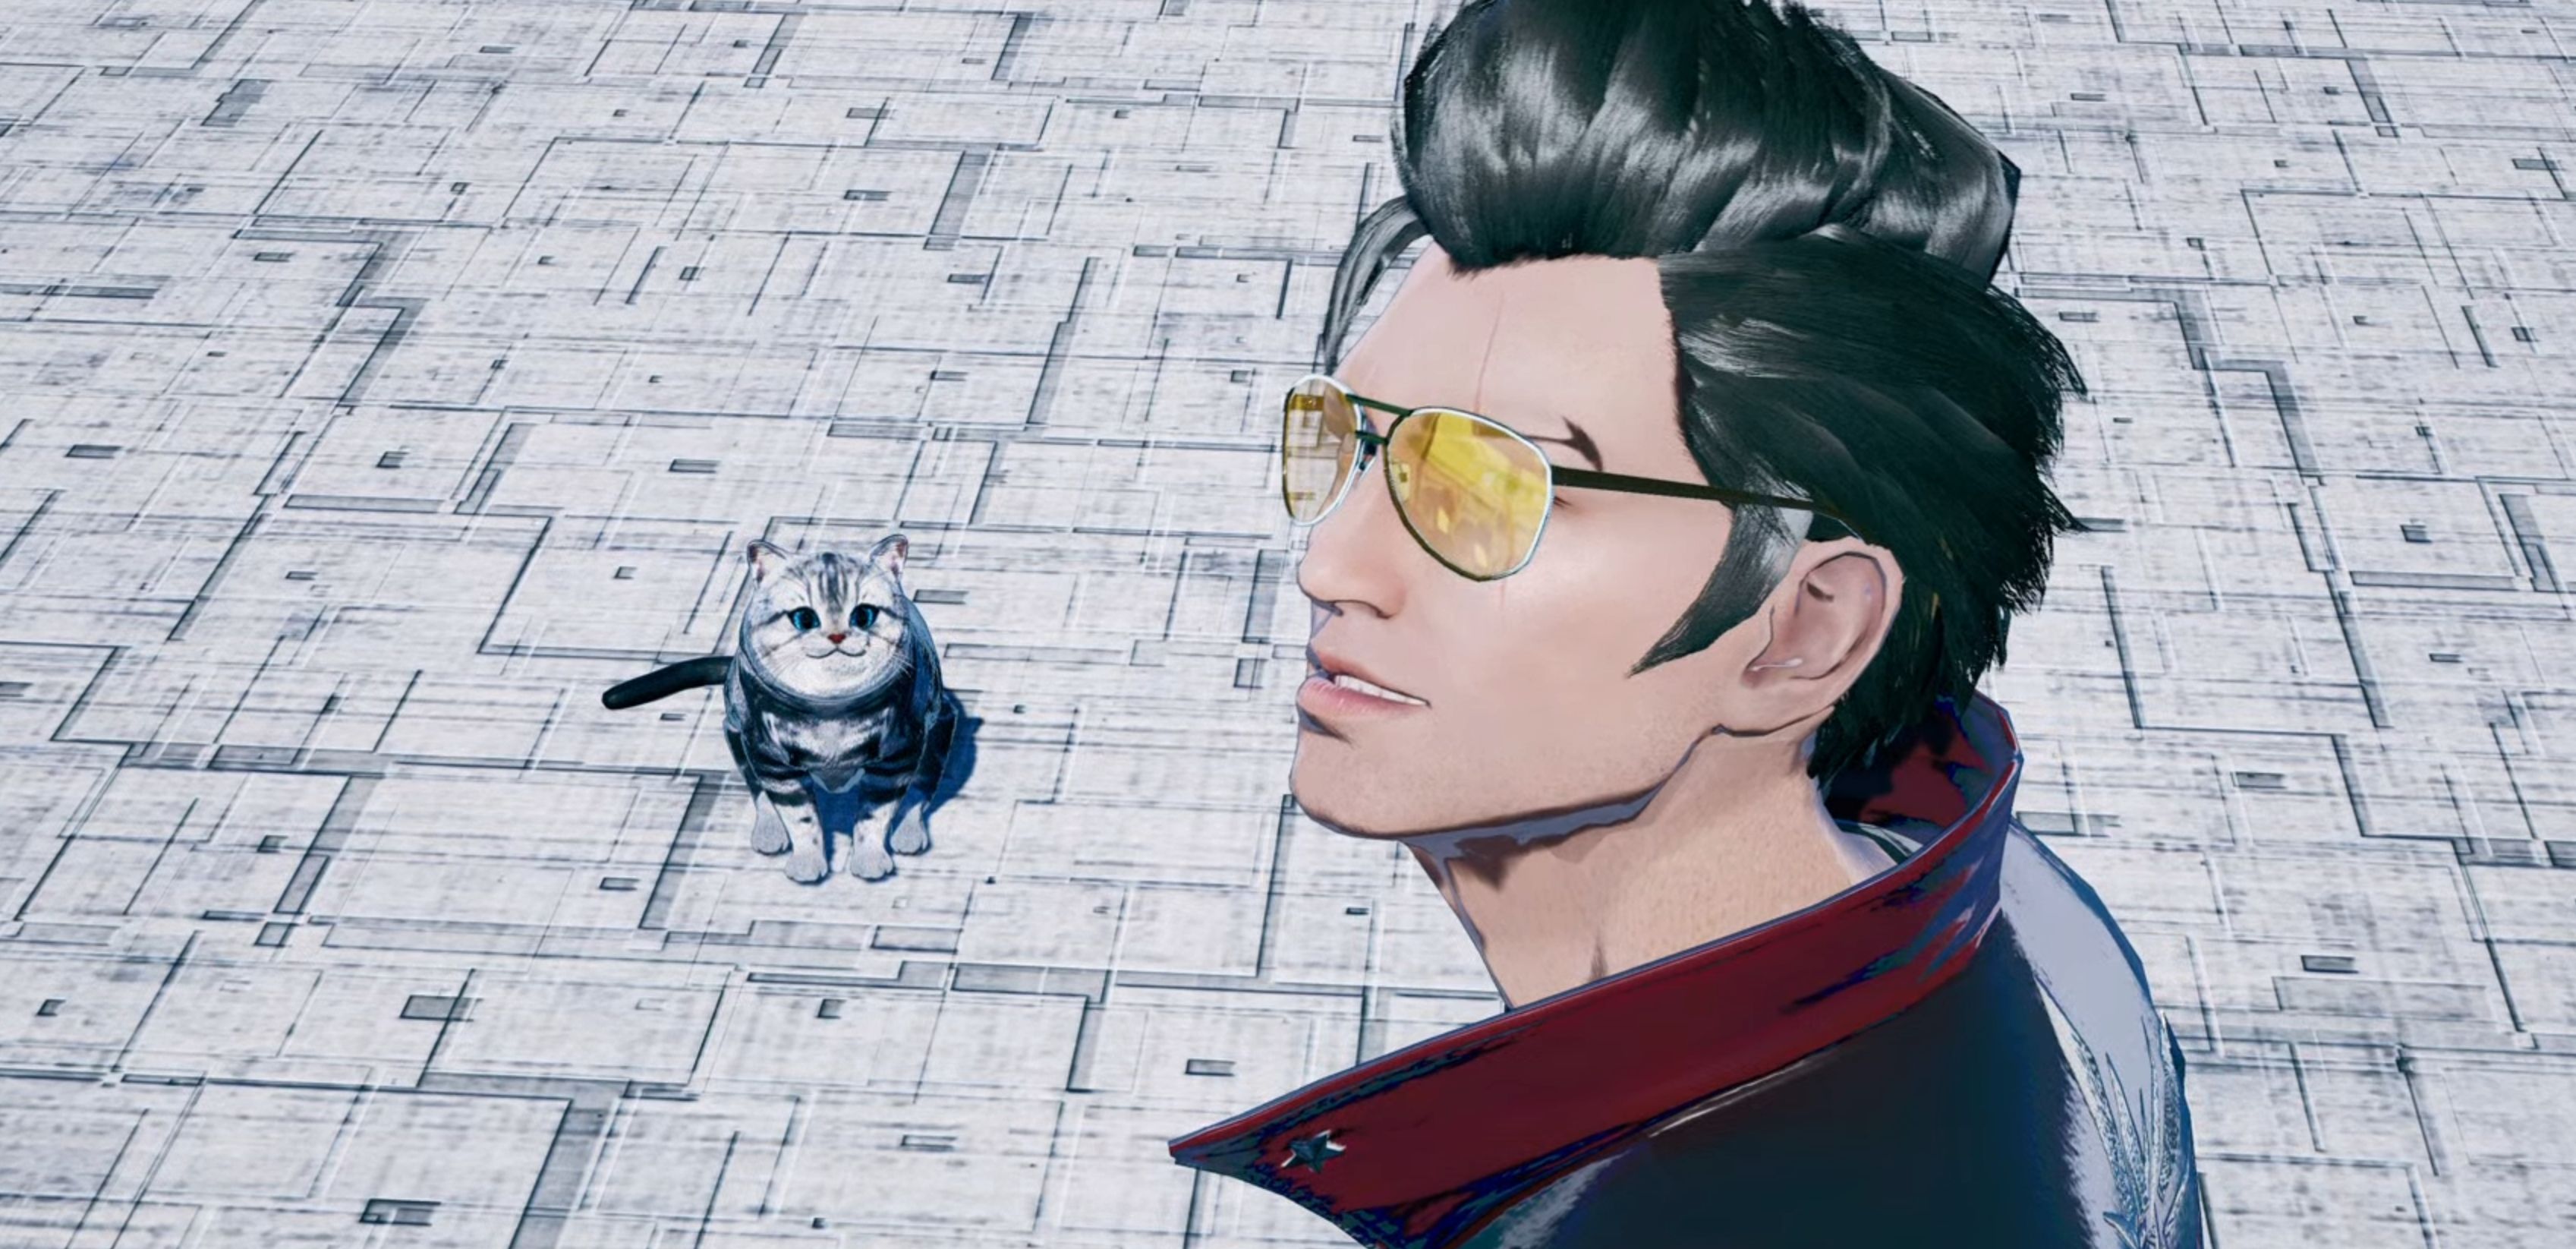 Image for No More Heroes 3 coming to PC, PlayStation, and Xbox in October